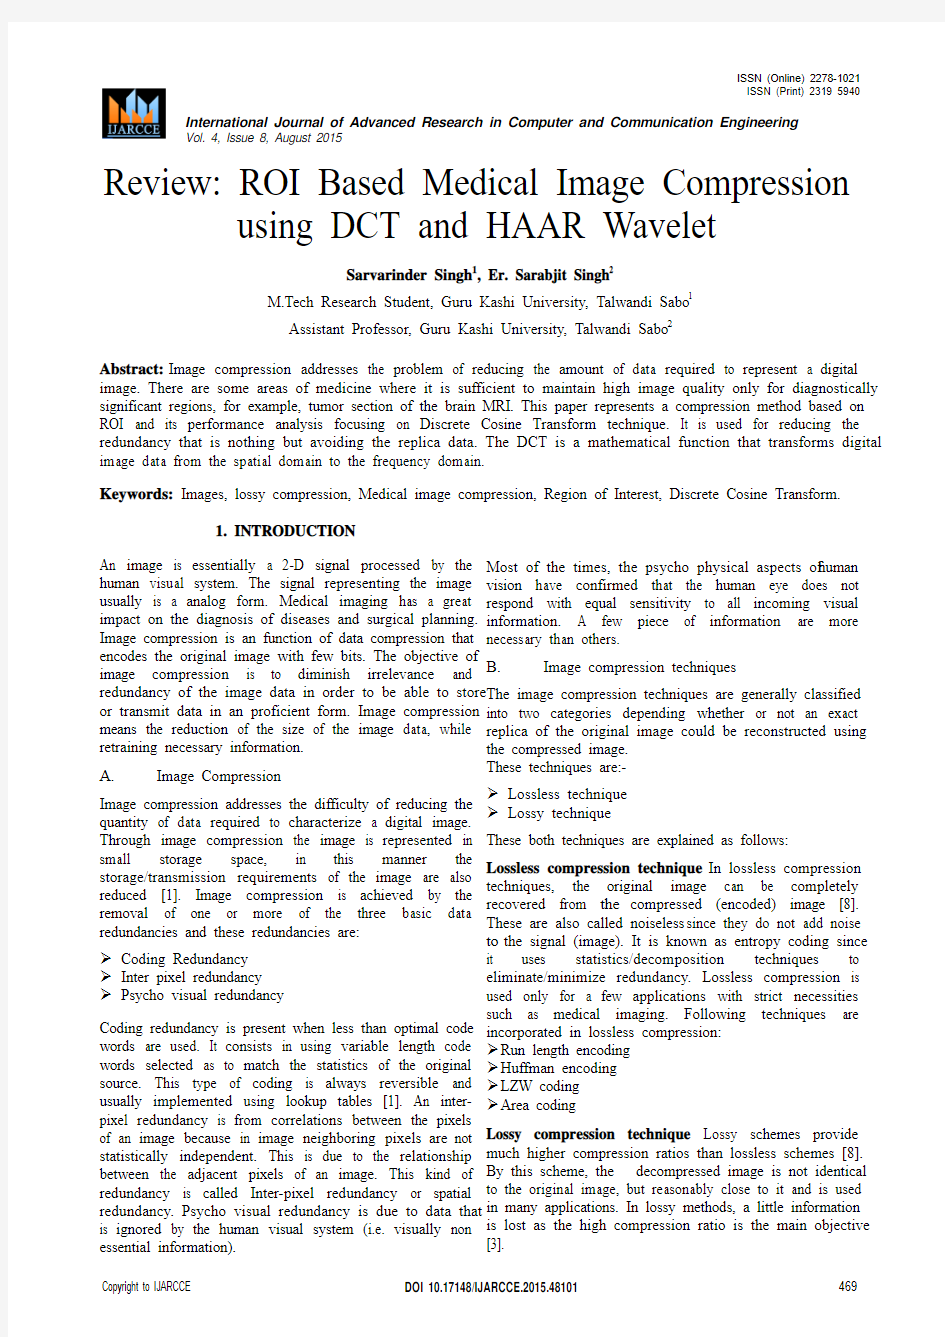 Review ROI Based Medical Image Compression using DCT and HAAR Wavelet